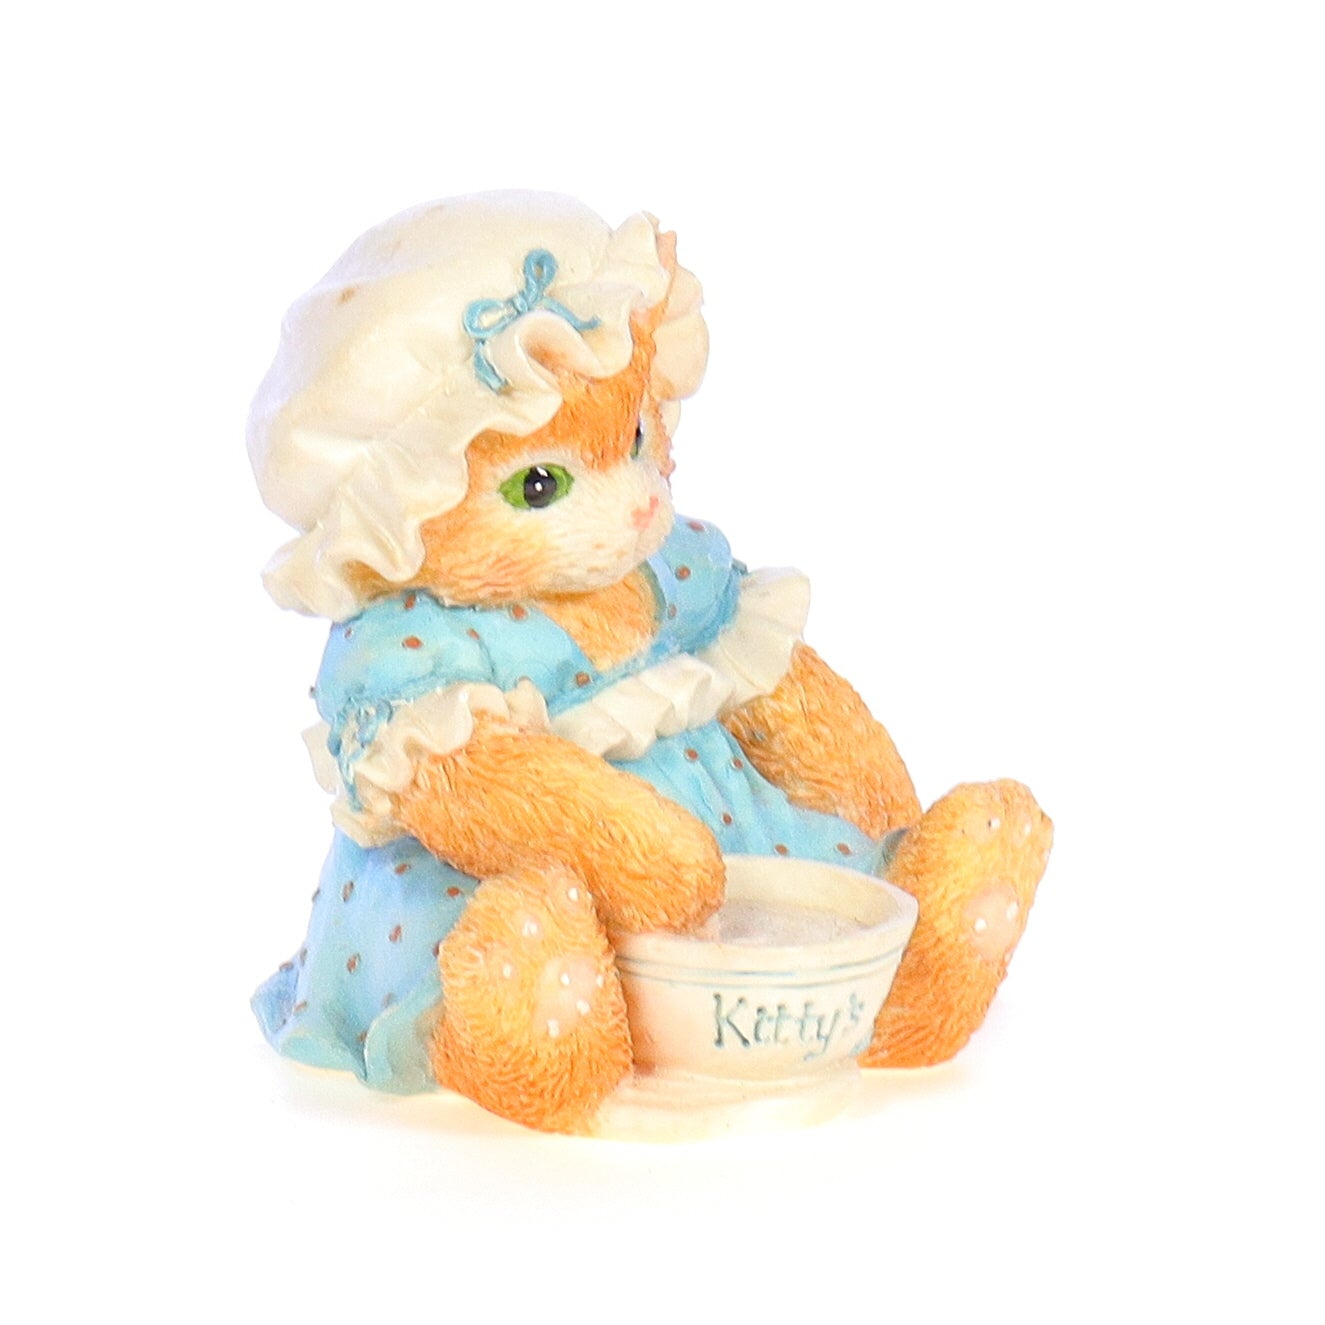 Calico_Kittens_Finicky_An_Unexpected_Treat_Figurine_1994